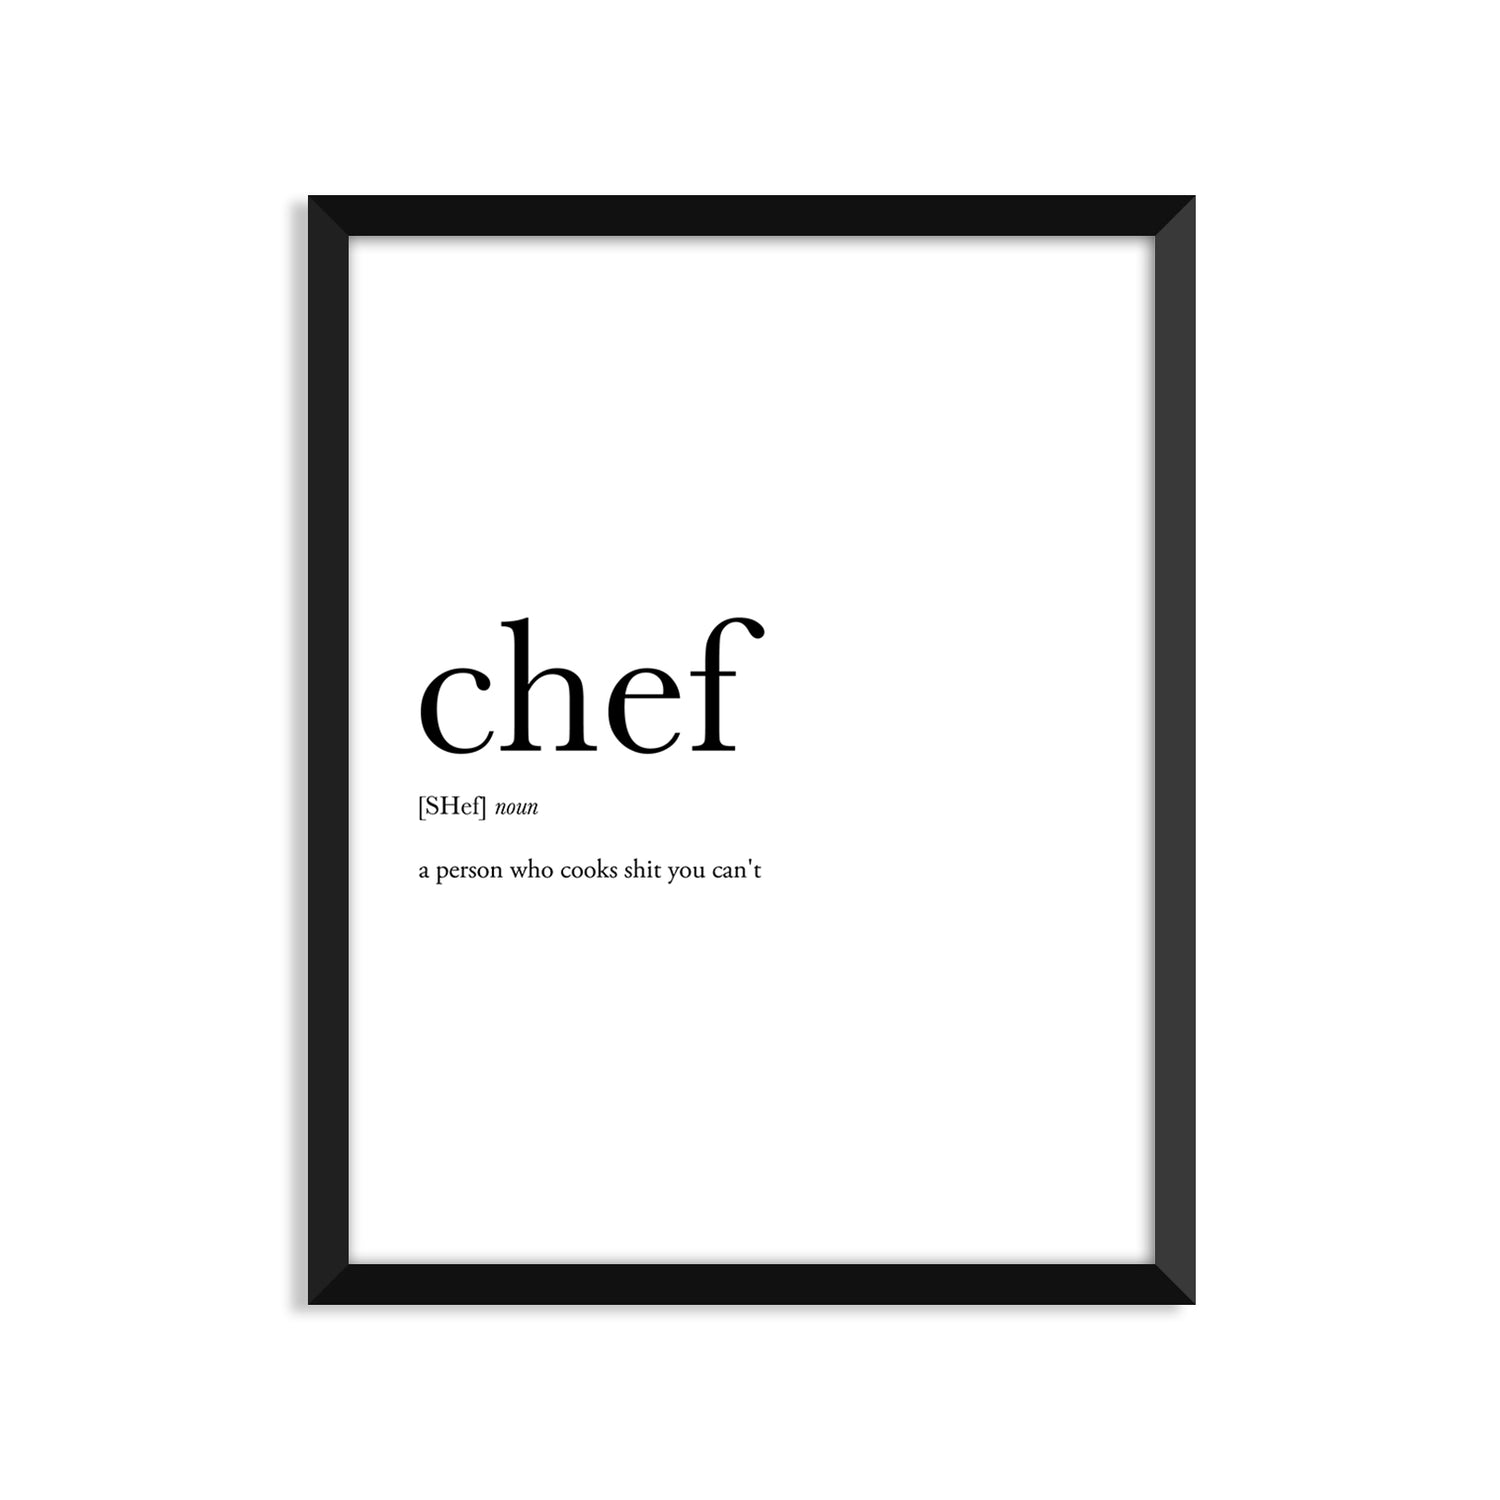 Footnotes: The Cook